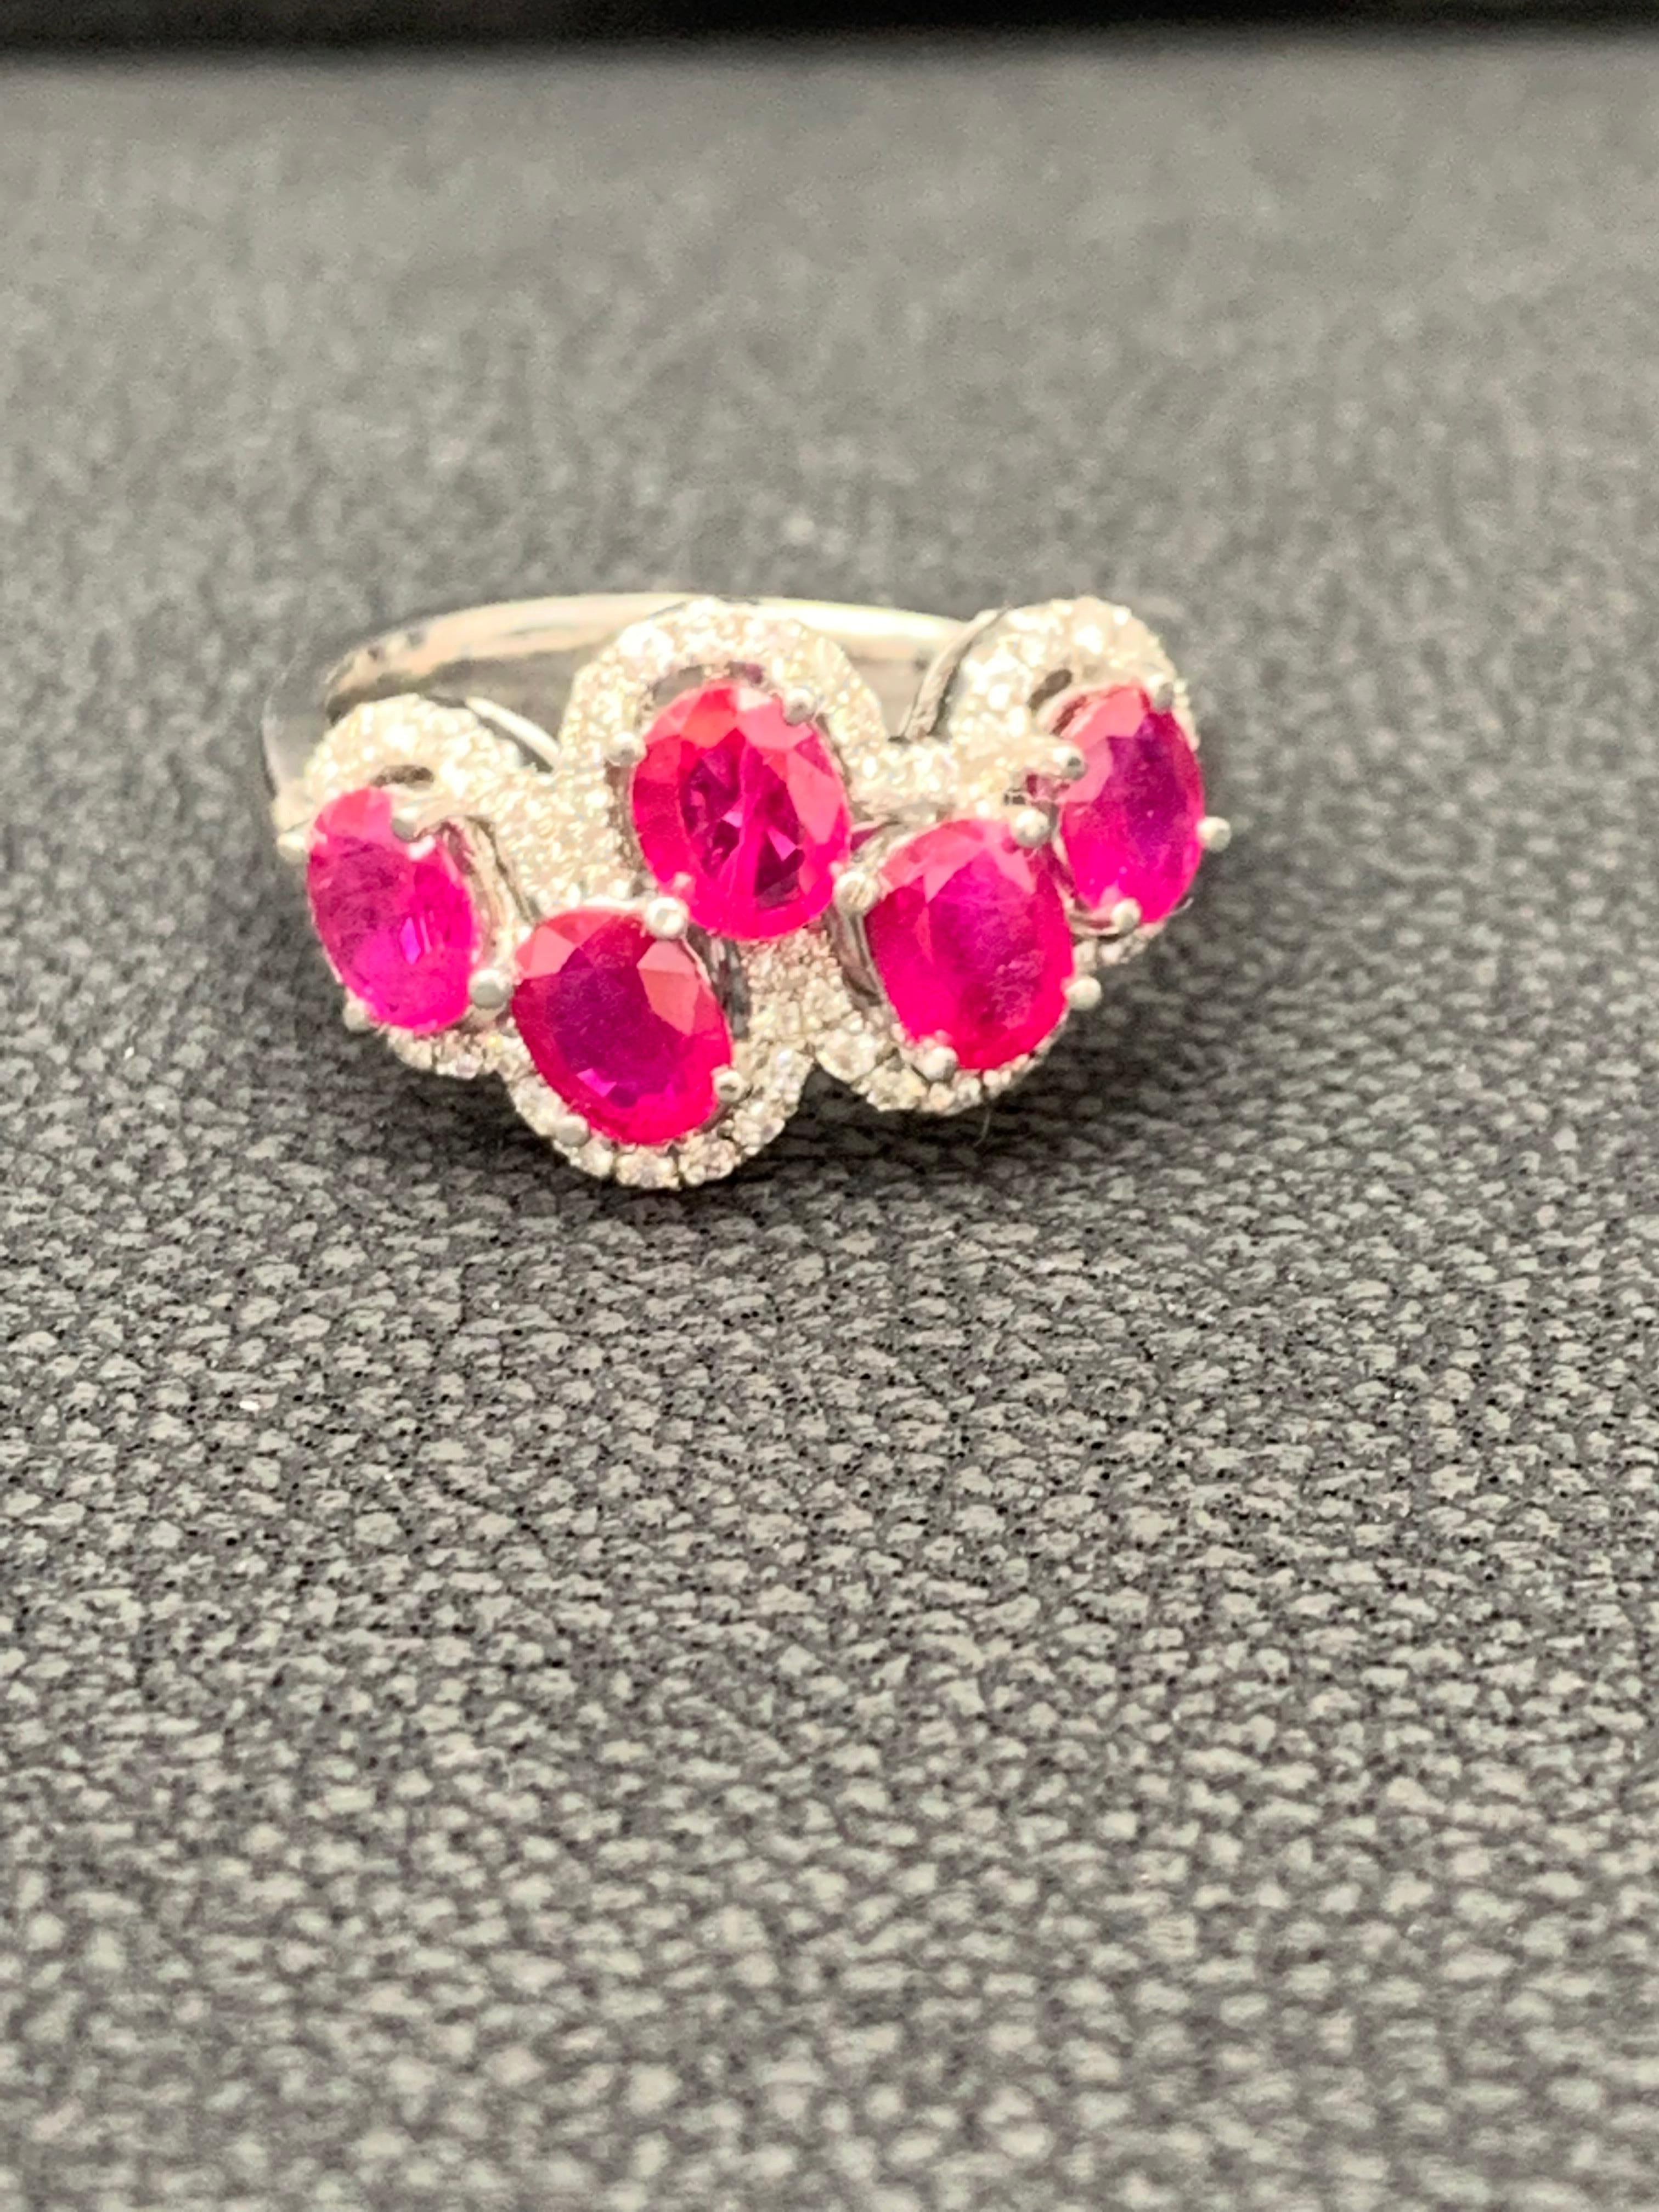 Beautiful ring set with 5 oval cut rubies weighing 2.25 carats total. Asymmetrically set rubies are  urrounded by a single row of round cut melee diamonds weighing 0.31 carats total. Set in 18k white gold. 

Size 6.5 US (Sizable). One of a Kind 